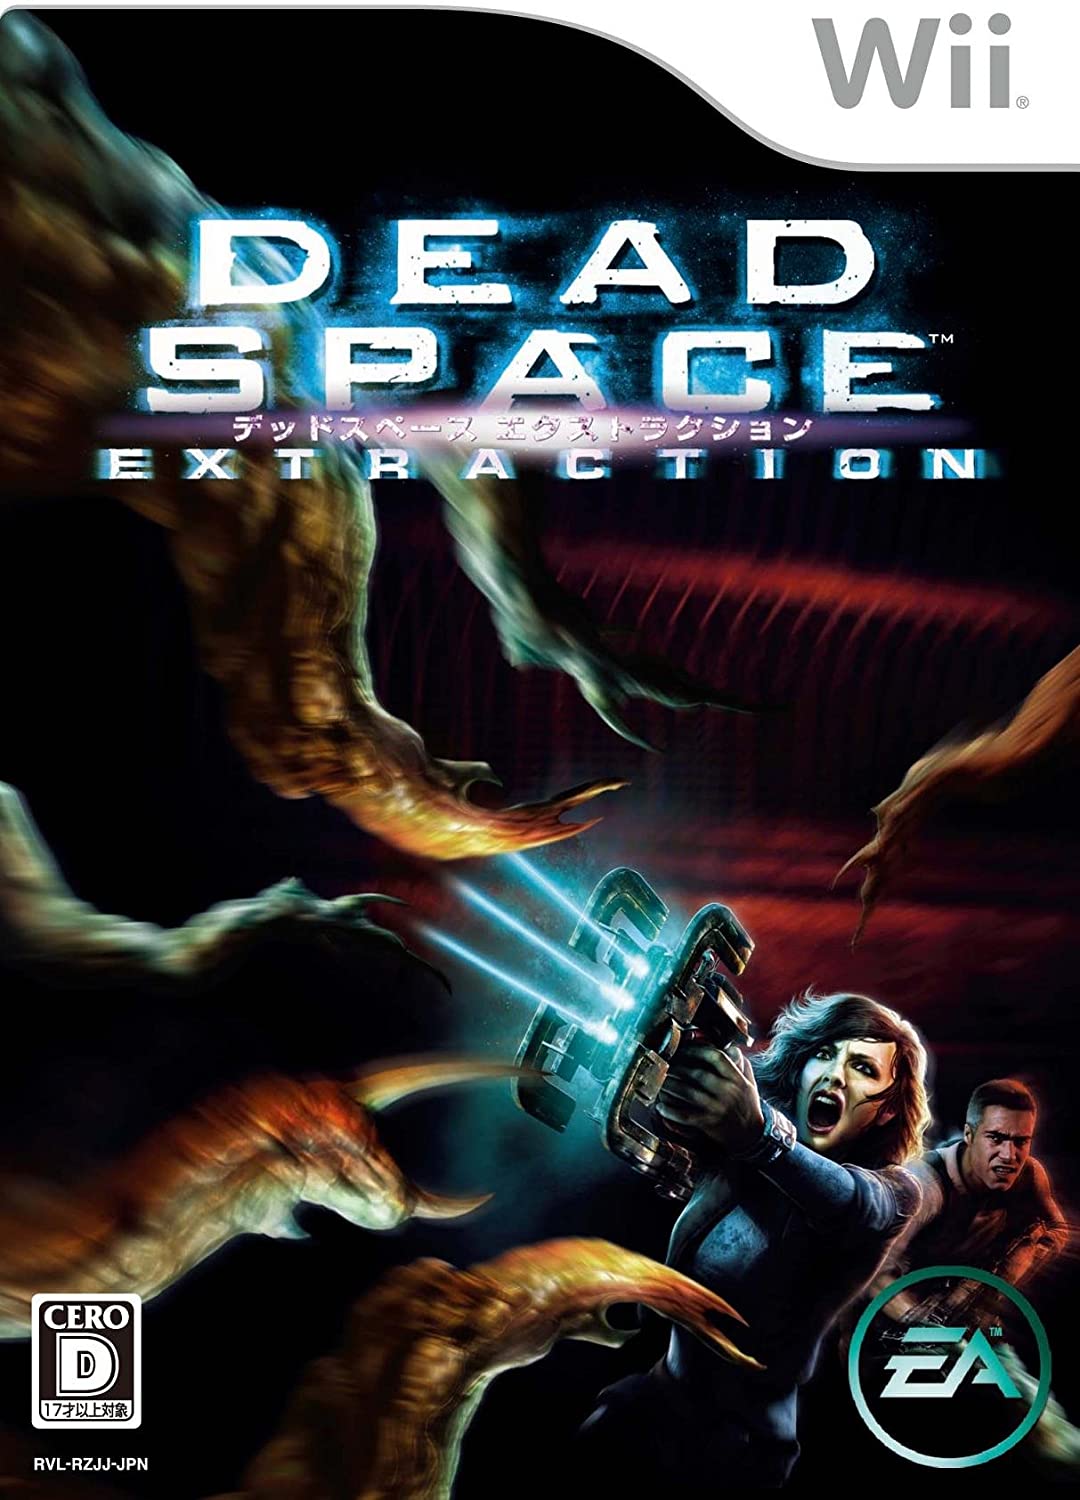 dead space extraction wii game time